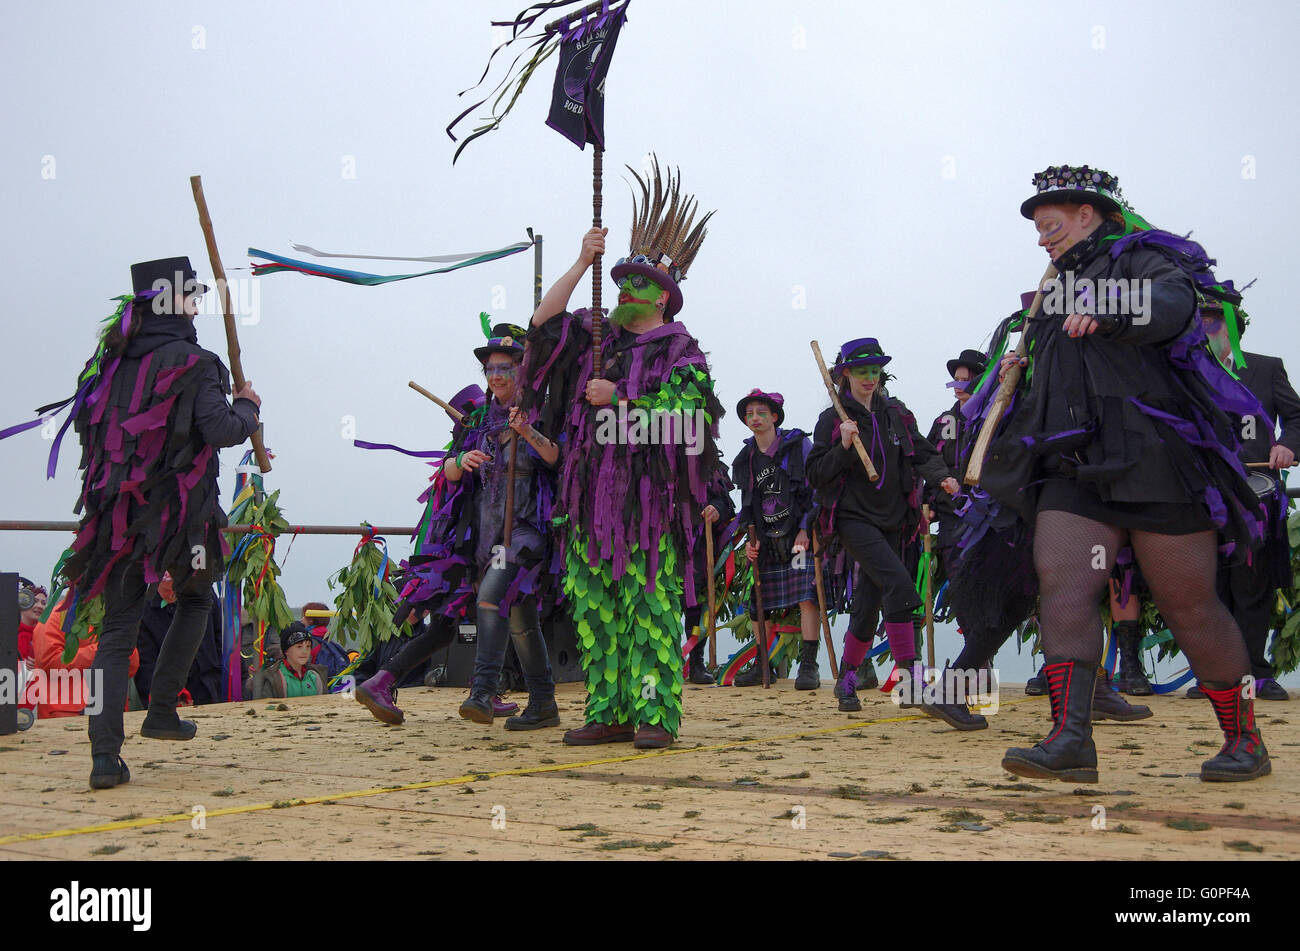 Hastings, East Sussex, UK. 2nd May 2016. The Hastings Jack in the Green festival is a traditional British May Day celebration marking the end of winter and the start of spring, centering on the mysterious figure of Jack in the Green from English folklore and involving Morris dancers and a bizarre costume parade. Credit:  Denis McWilliams/Alamy Live News Stock Photo